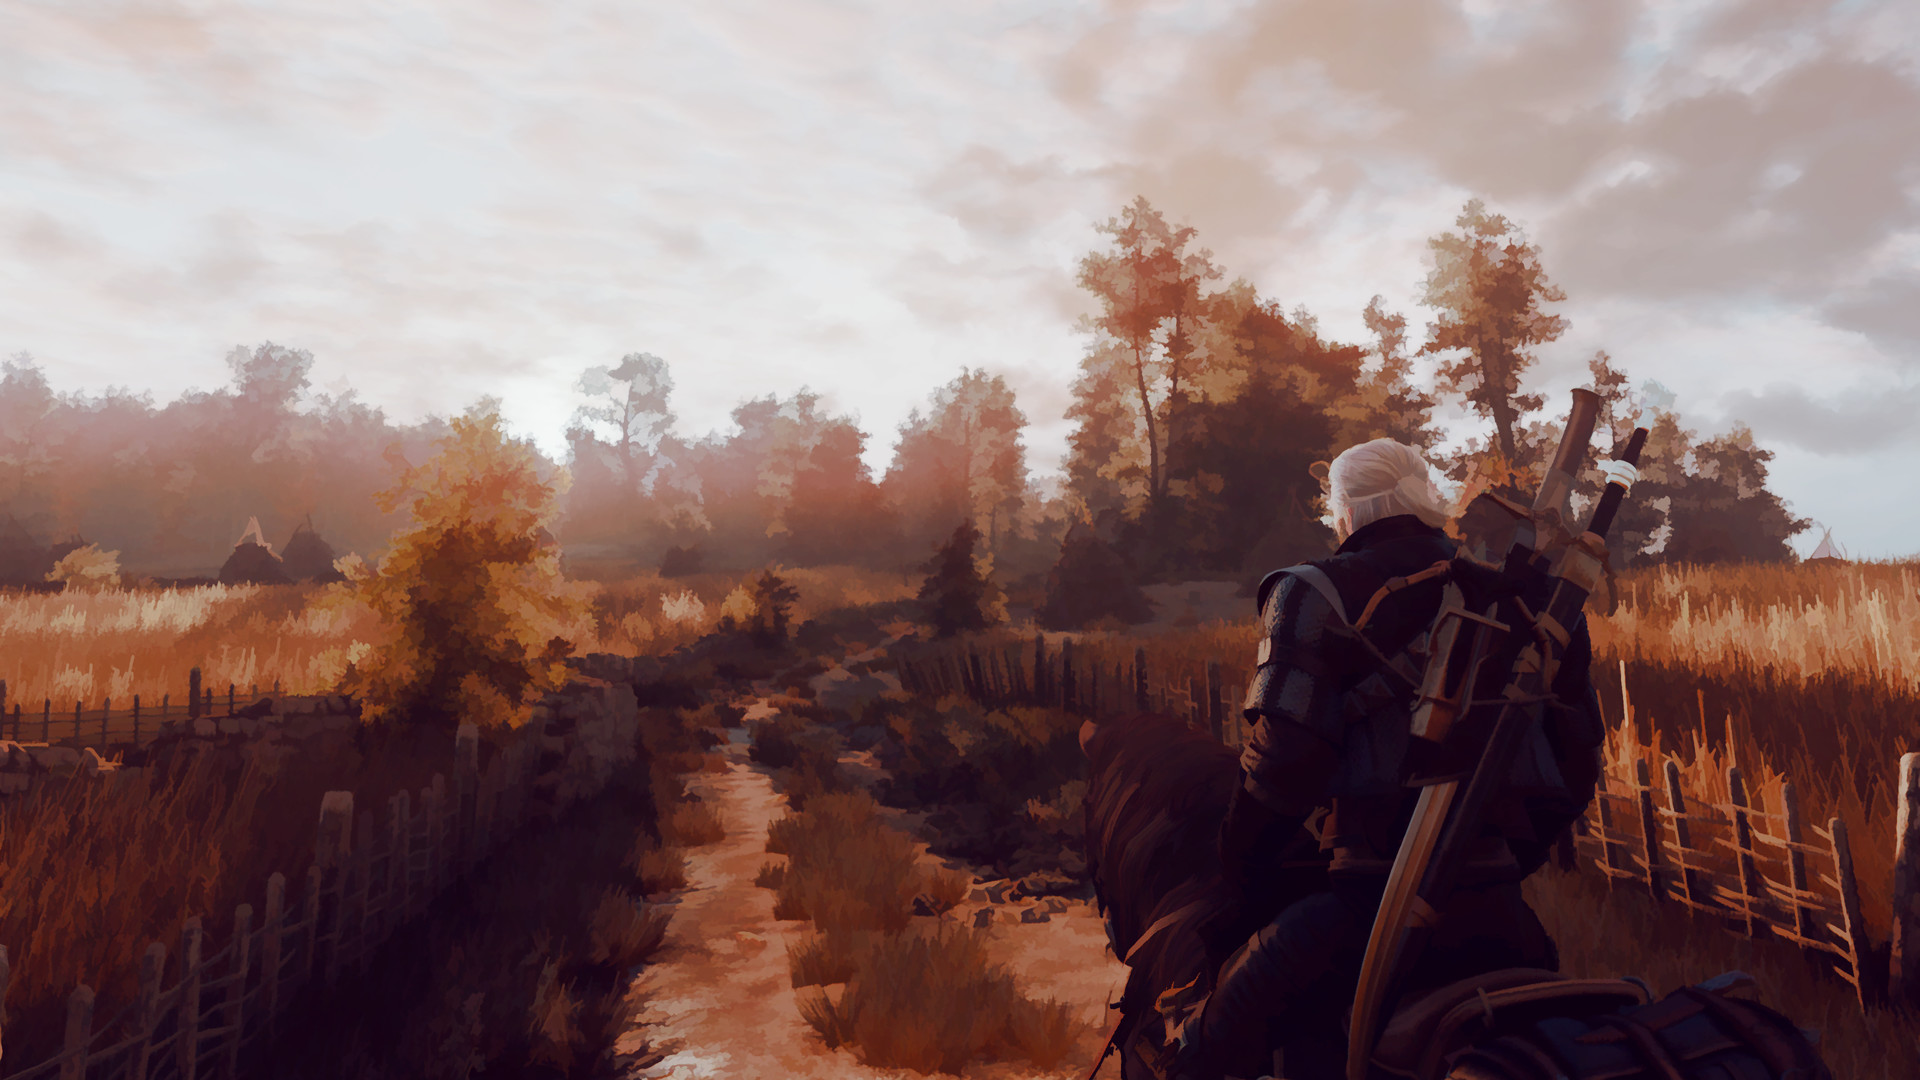 1920x1080 Here are 63 screenshots of The Witcher III made to look like paintings  using mods and photoshop; all images are 1080p. For those using ultrawide  (21:9) ...